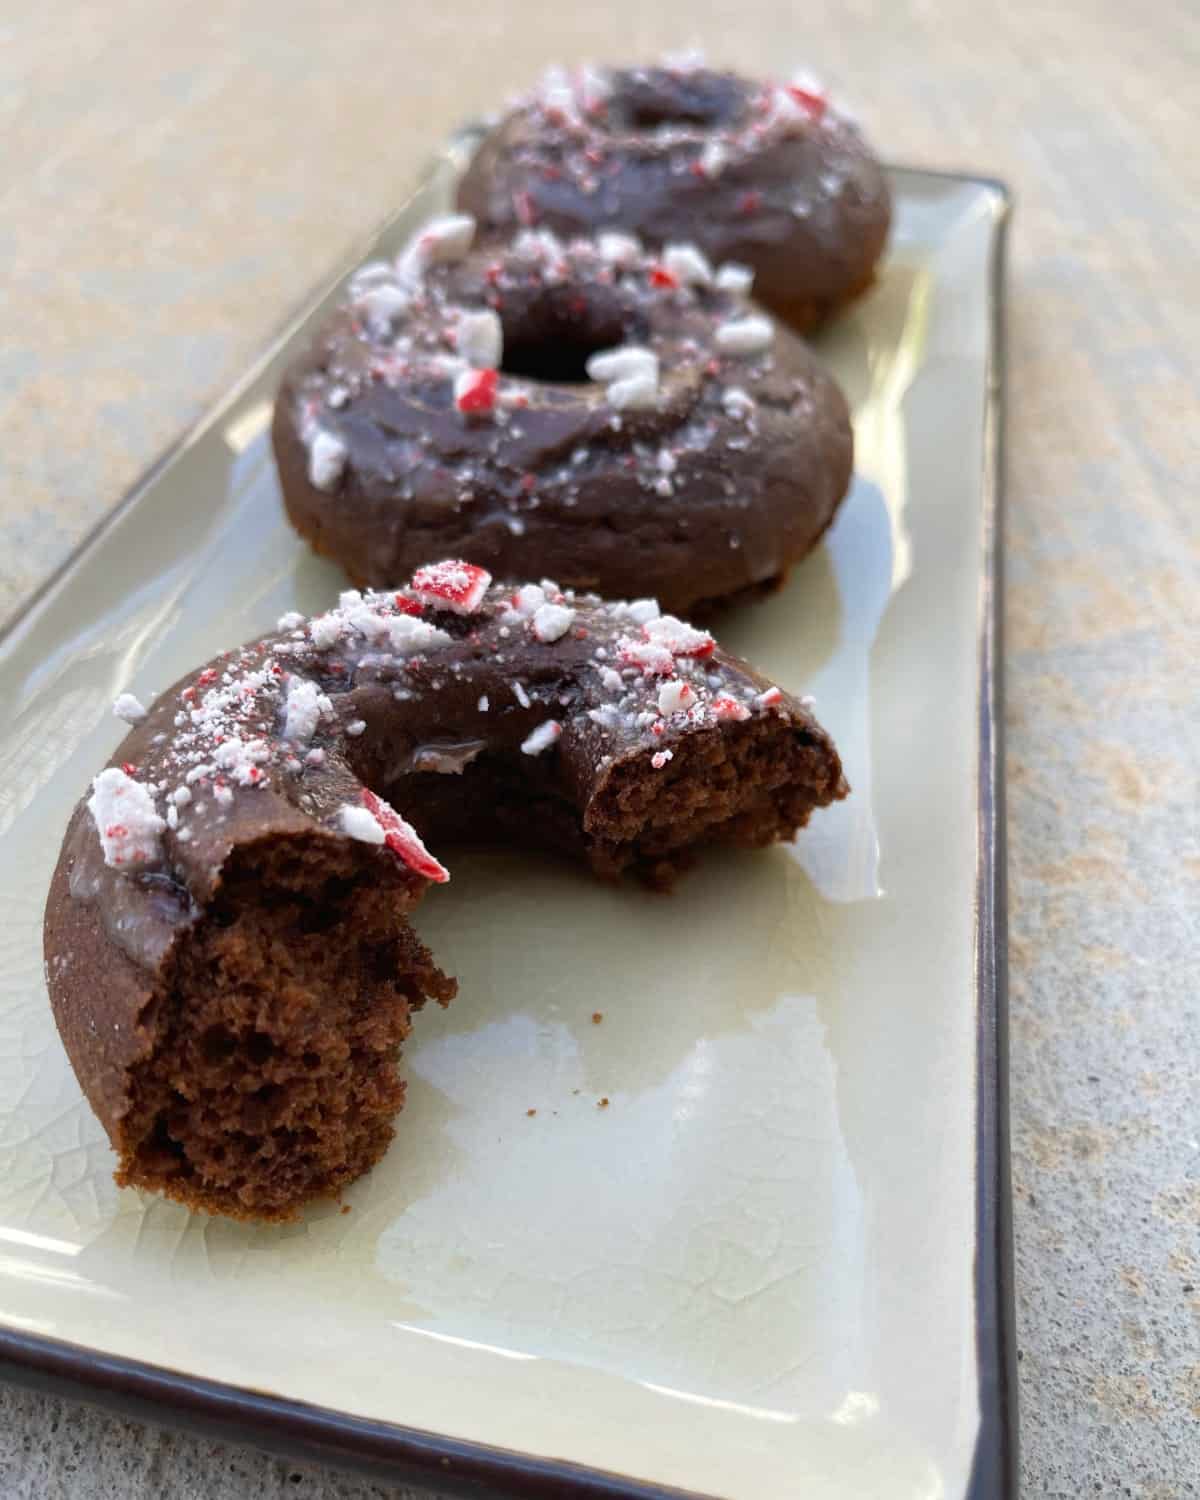 Two-and-a-half mint chocolate glazed donuts on rectangular platter.